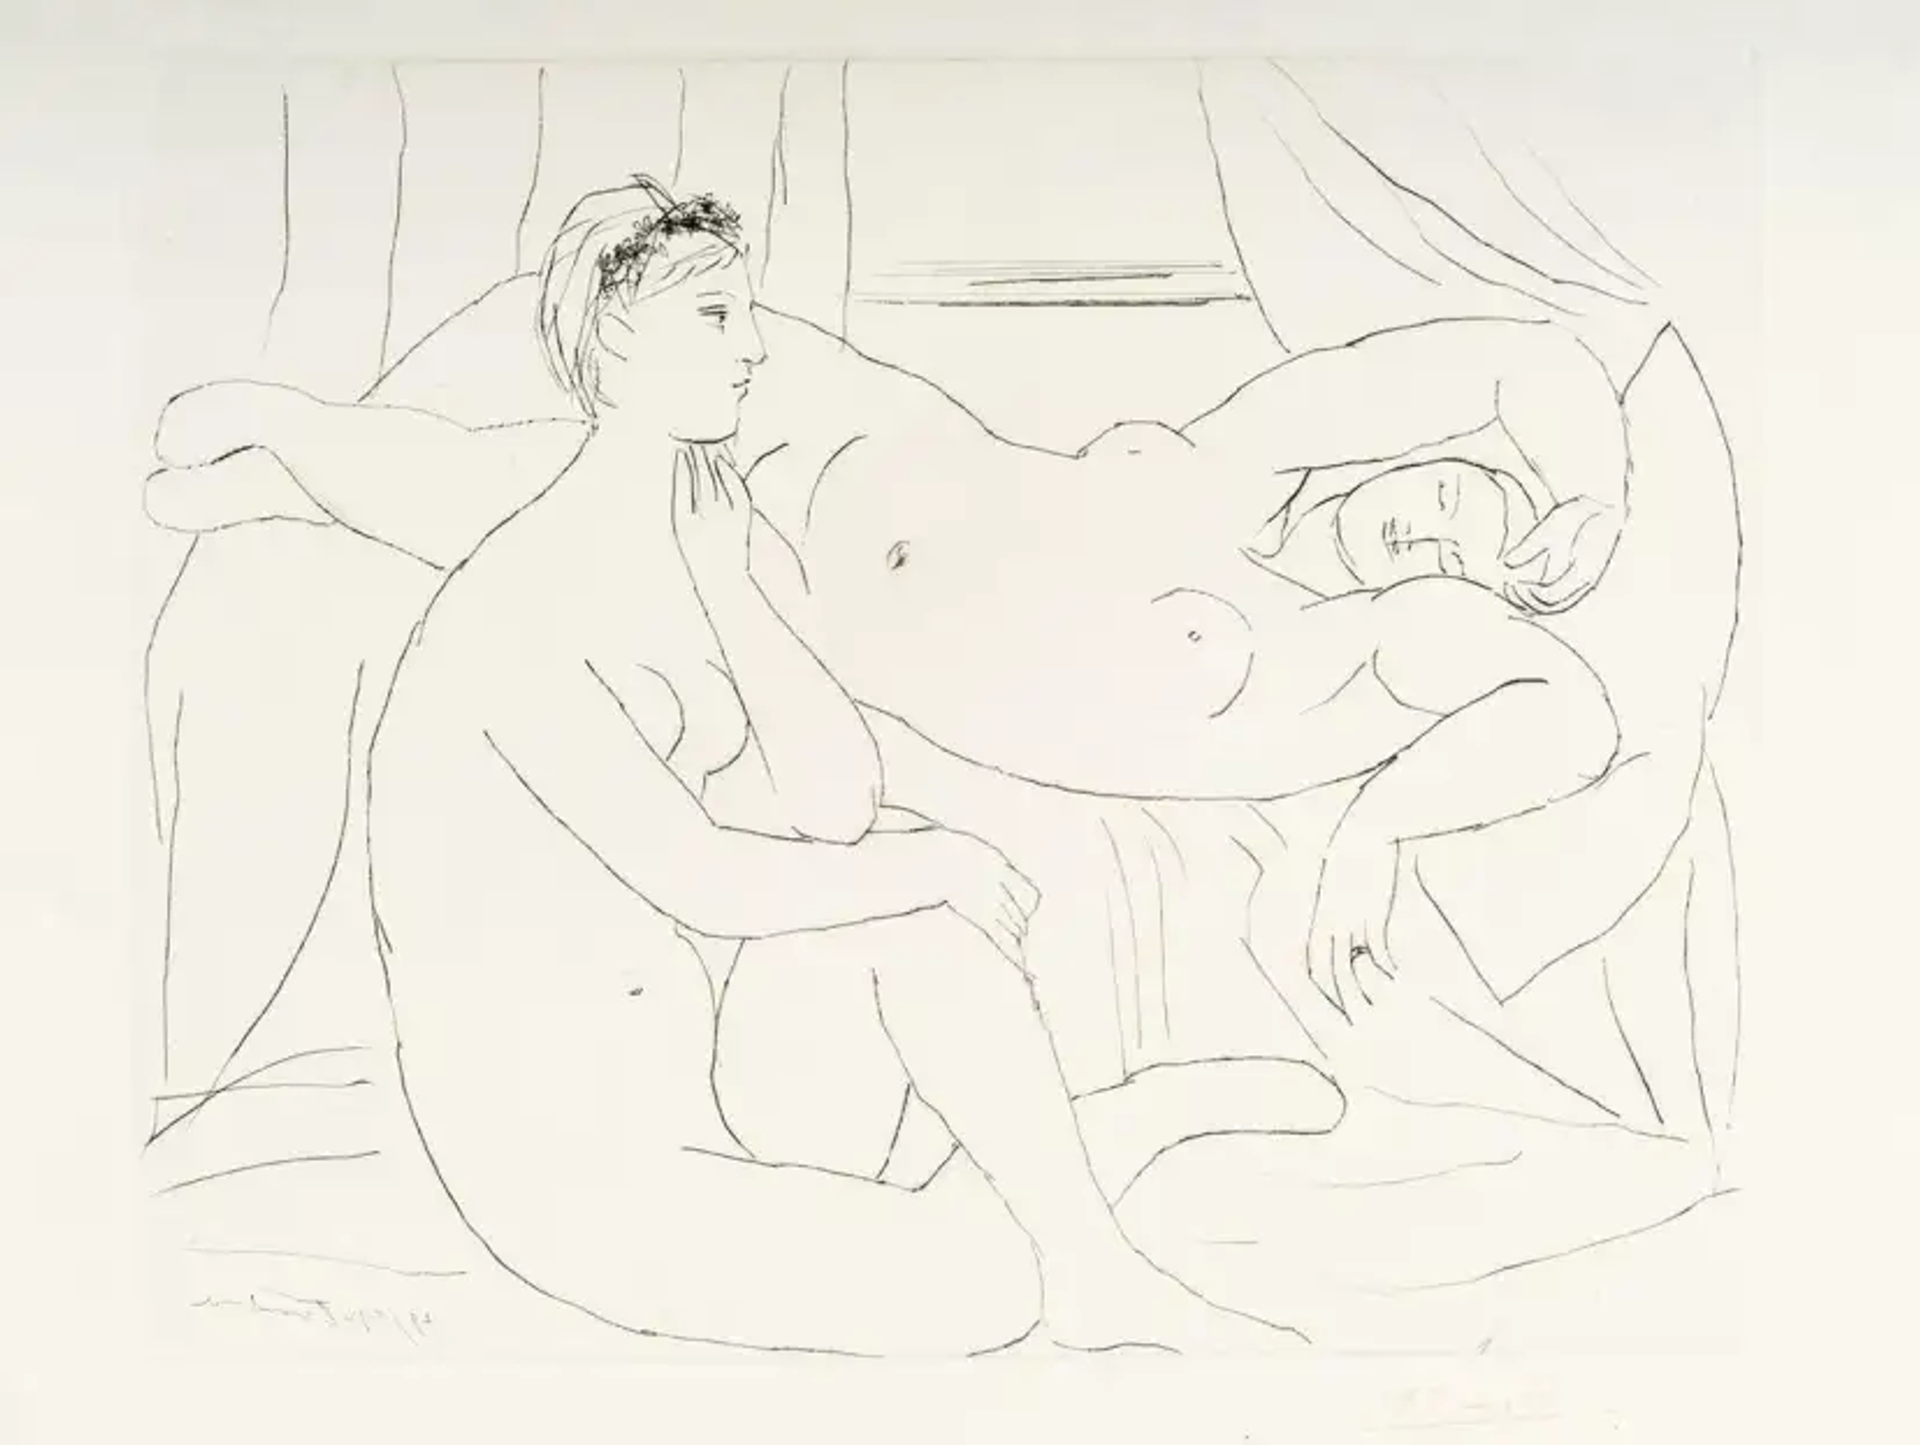 A drawing by Pablo Picasso, showing two female nudes within a domestic environment. One is seen sitting while the other lies down and sleeps.